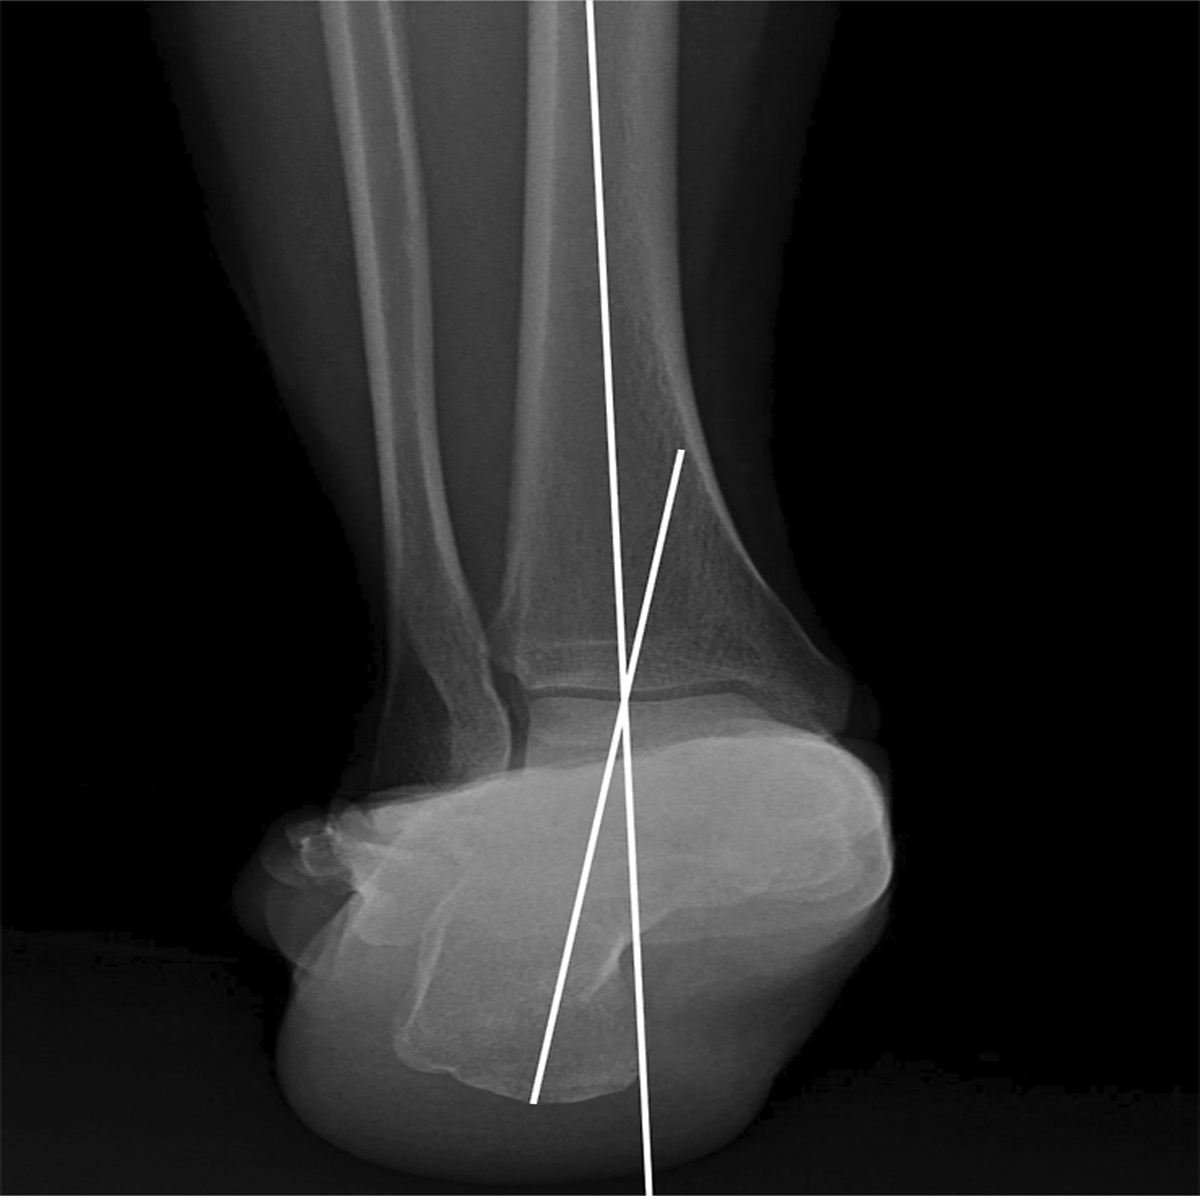 Preoperative Hindfoot Alignment and Outcomes After High Tibial Osteotomy for Varus Knee Osteoarthritis: We Walk on Our Heel, Not Our Ankle